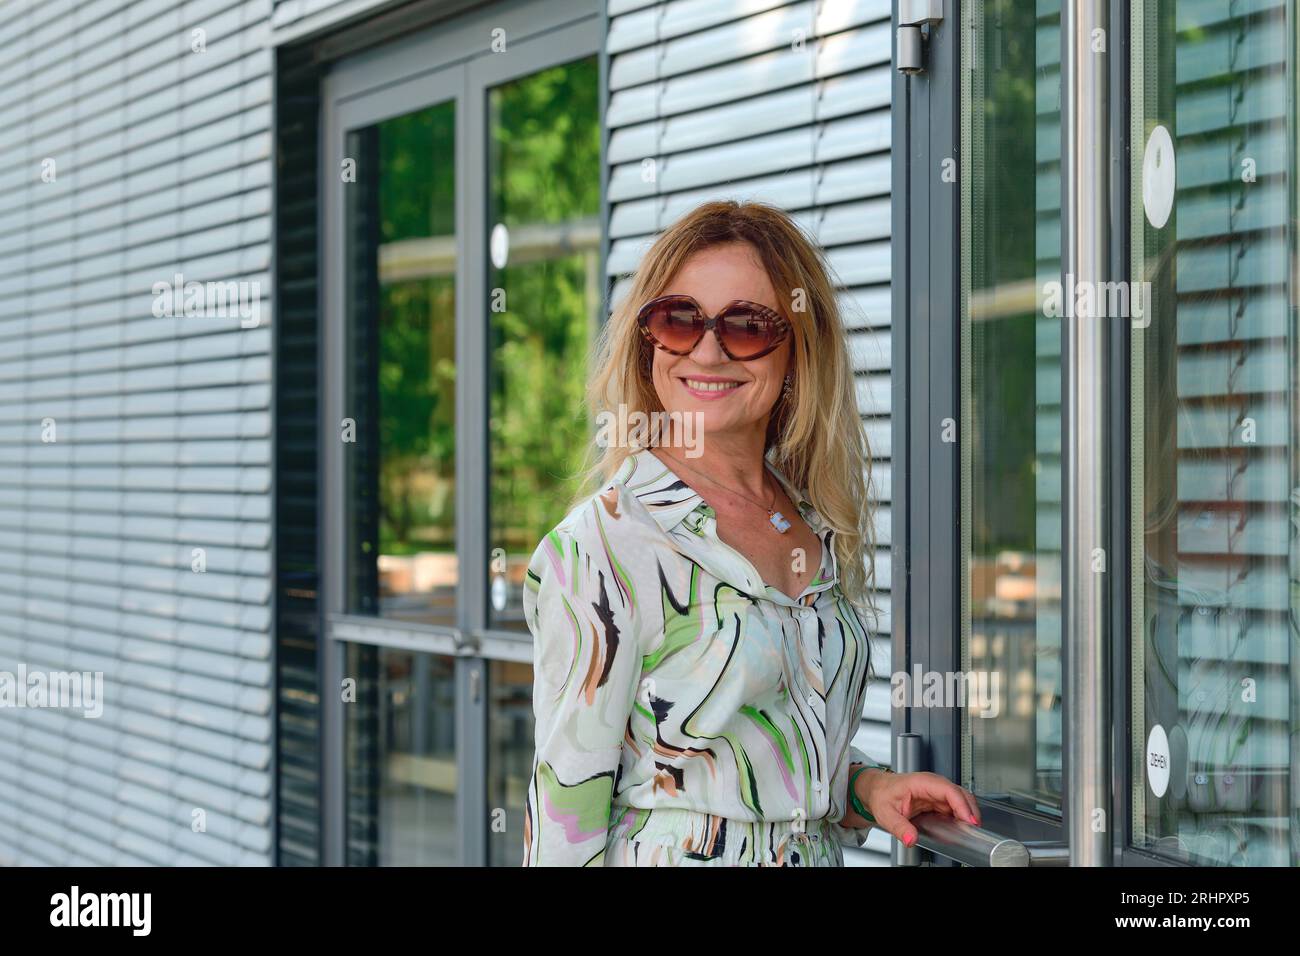 Woman with sunglasses enters modern industrial building and smiles at camera Stock Photo